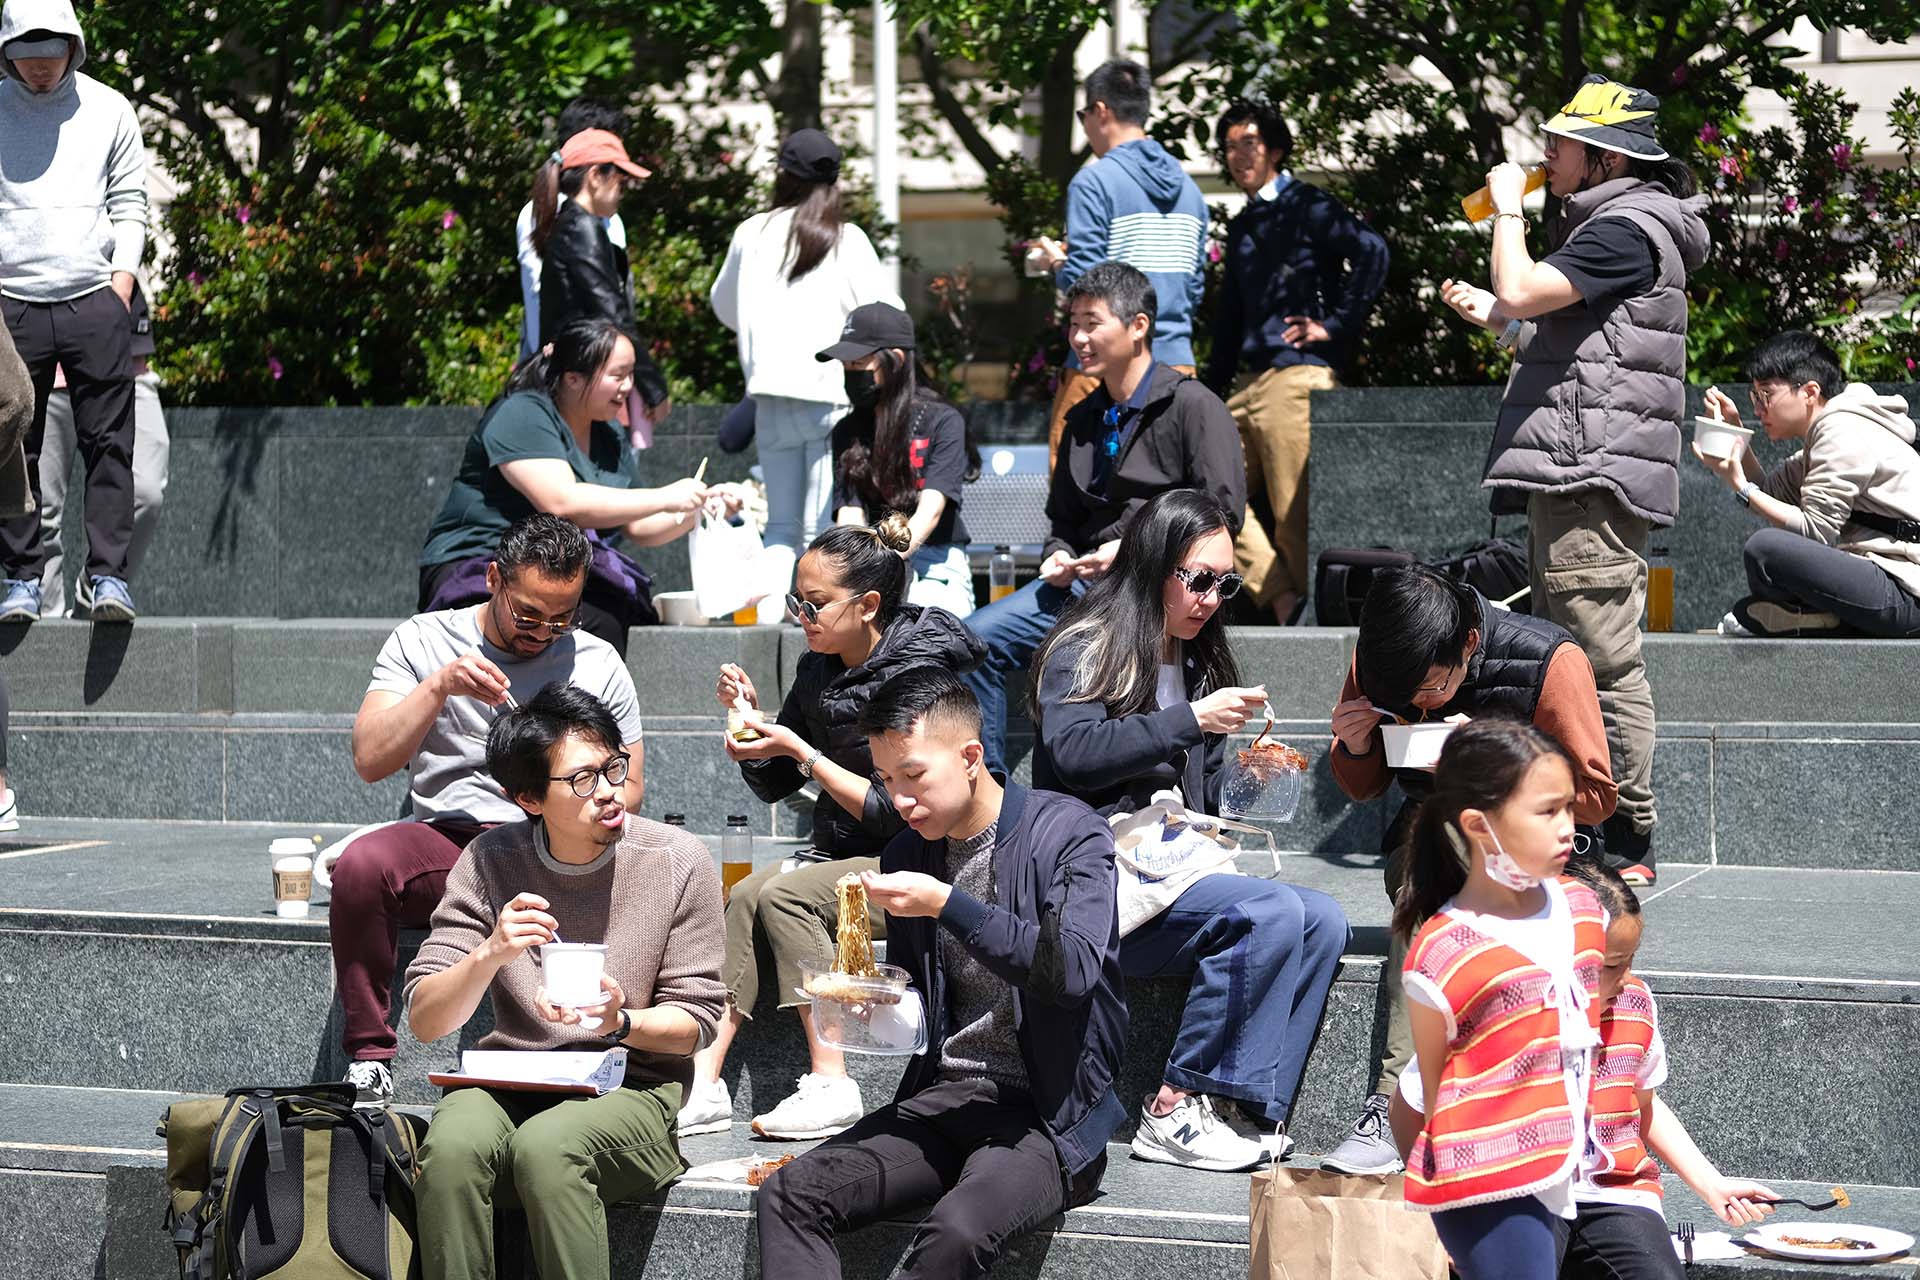 A crowd of people sit eating noodles from paper bowls on a set of stairs outside in Union Square, San Francisco.